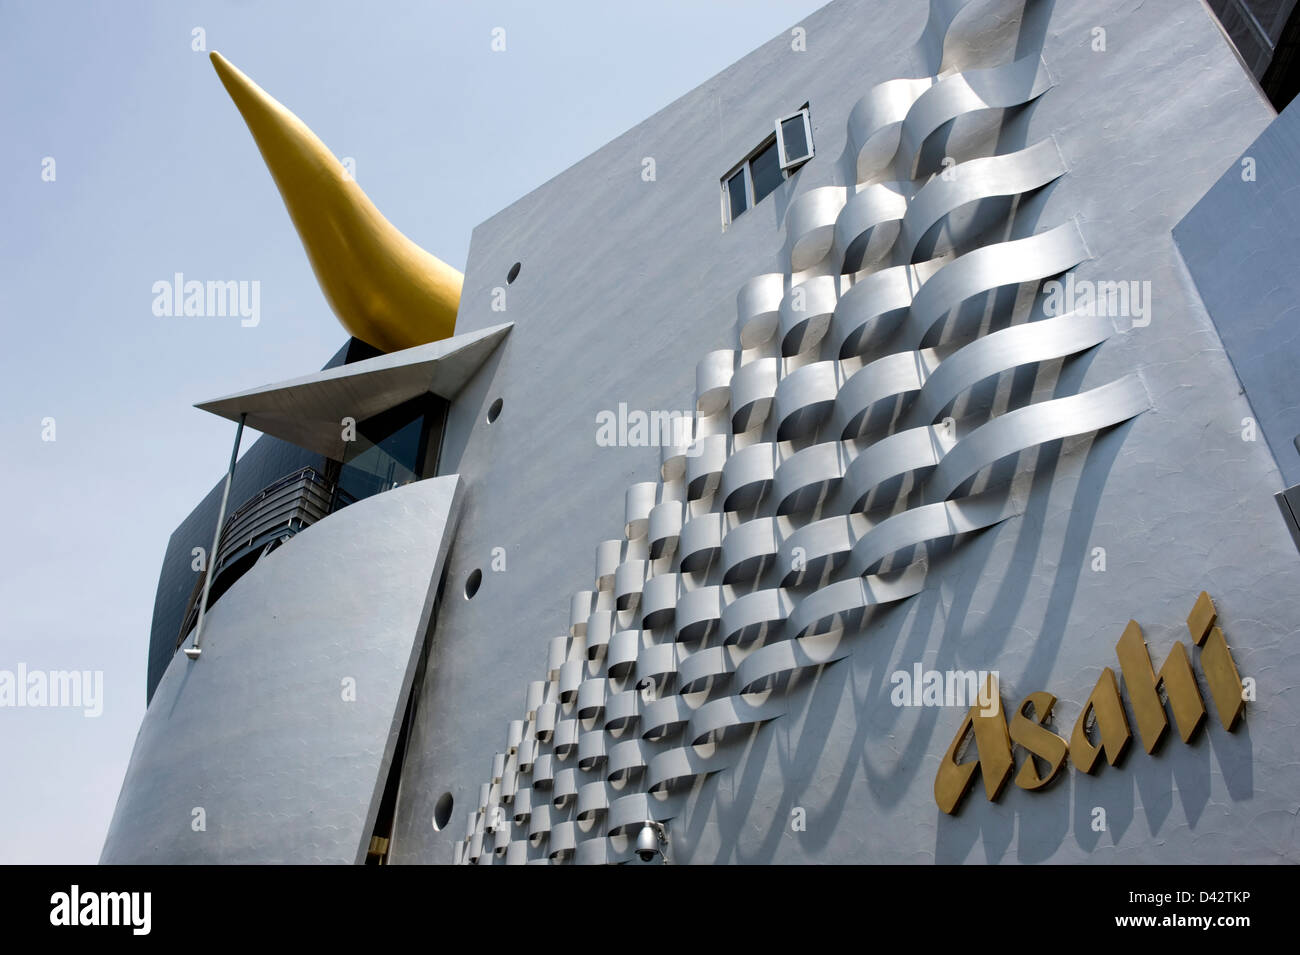 Unique gold flame sculpture, or Flamme d'Or, at Asahi Super Dry Beer Hall designed by French architect Philippe Starck. Stock Photo